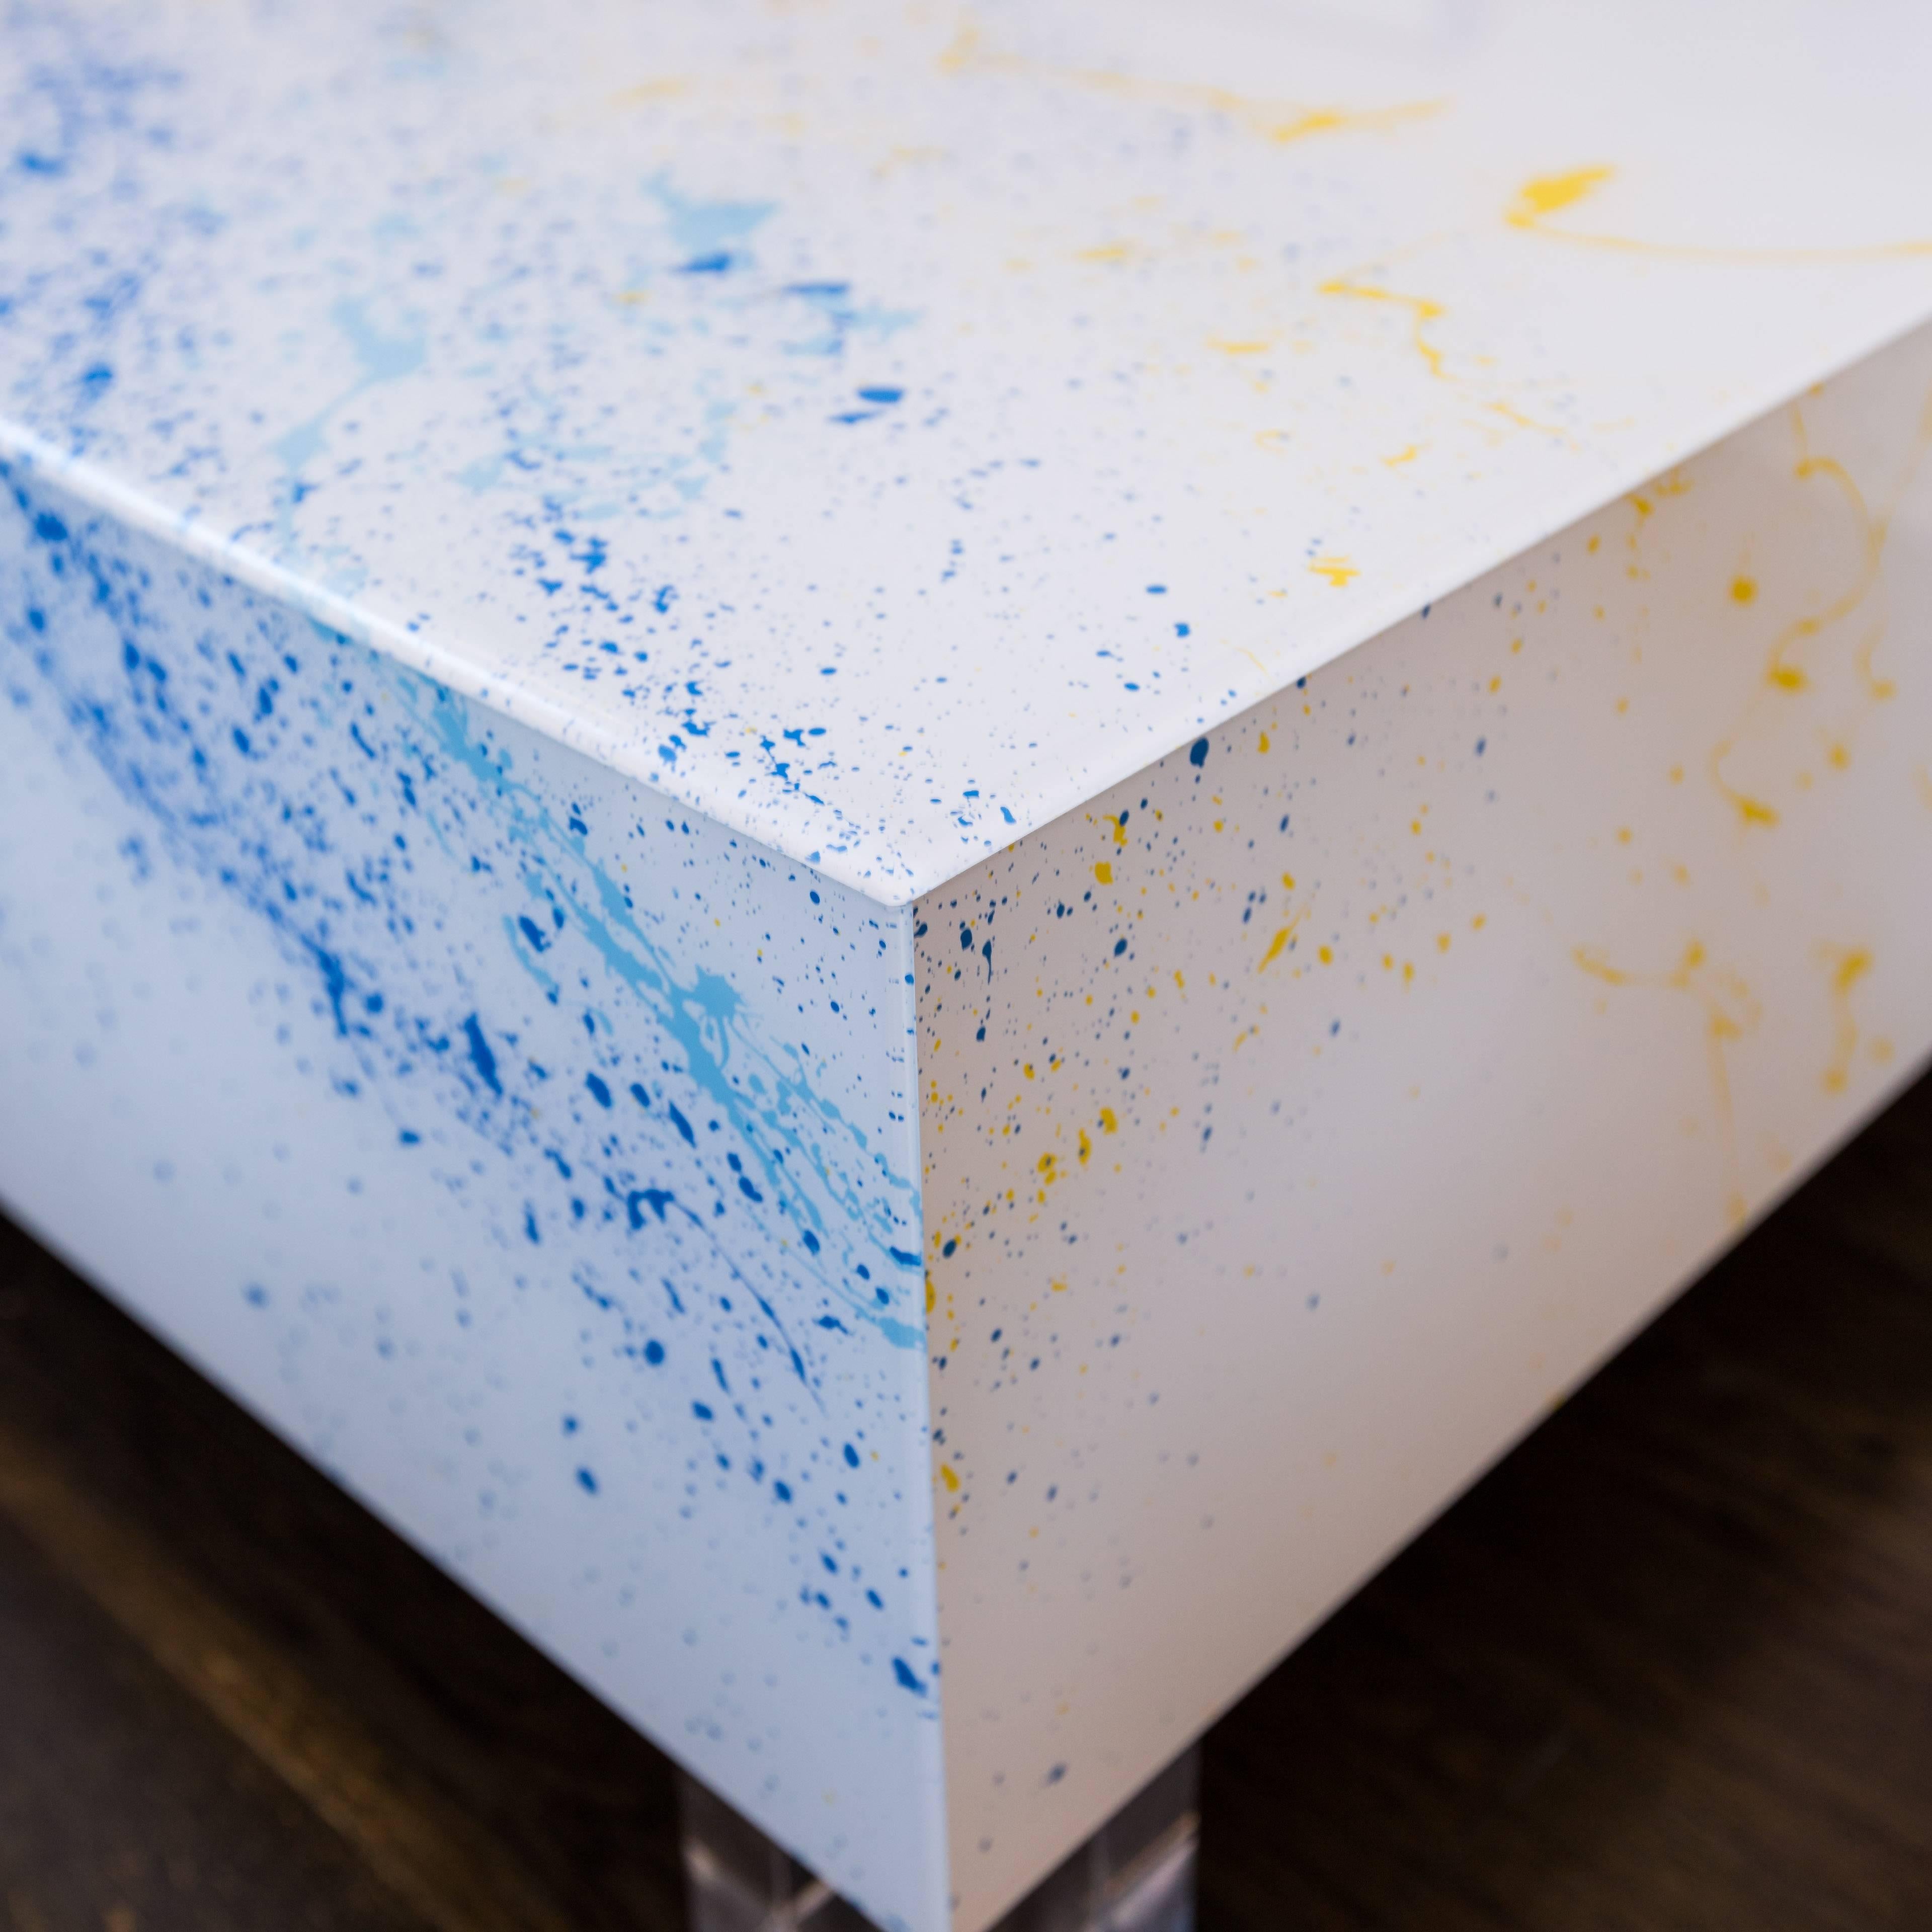 Custom, one-of-a-kind coffee table made of reverse drip-painted Lucite panels sitting on solid Lucite feet. White background with two shades of blue and some yellow Jackson Pollock-like splatters.